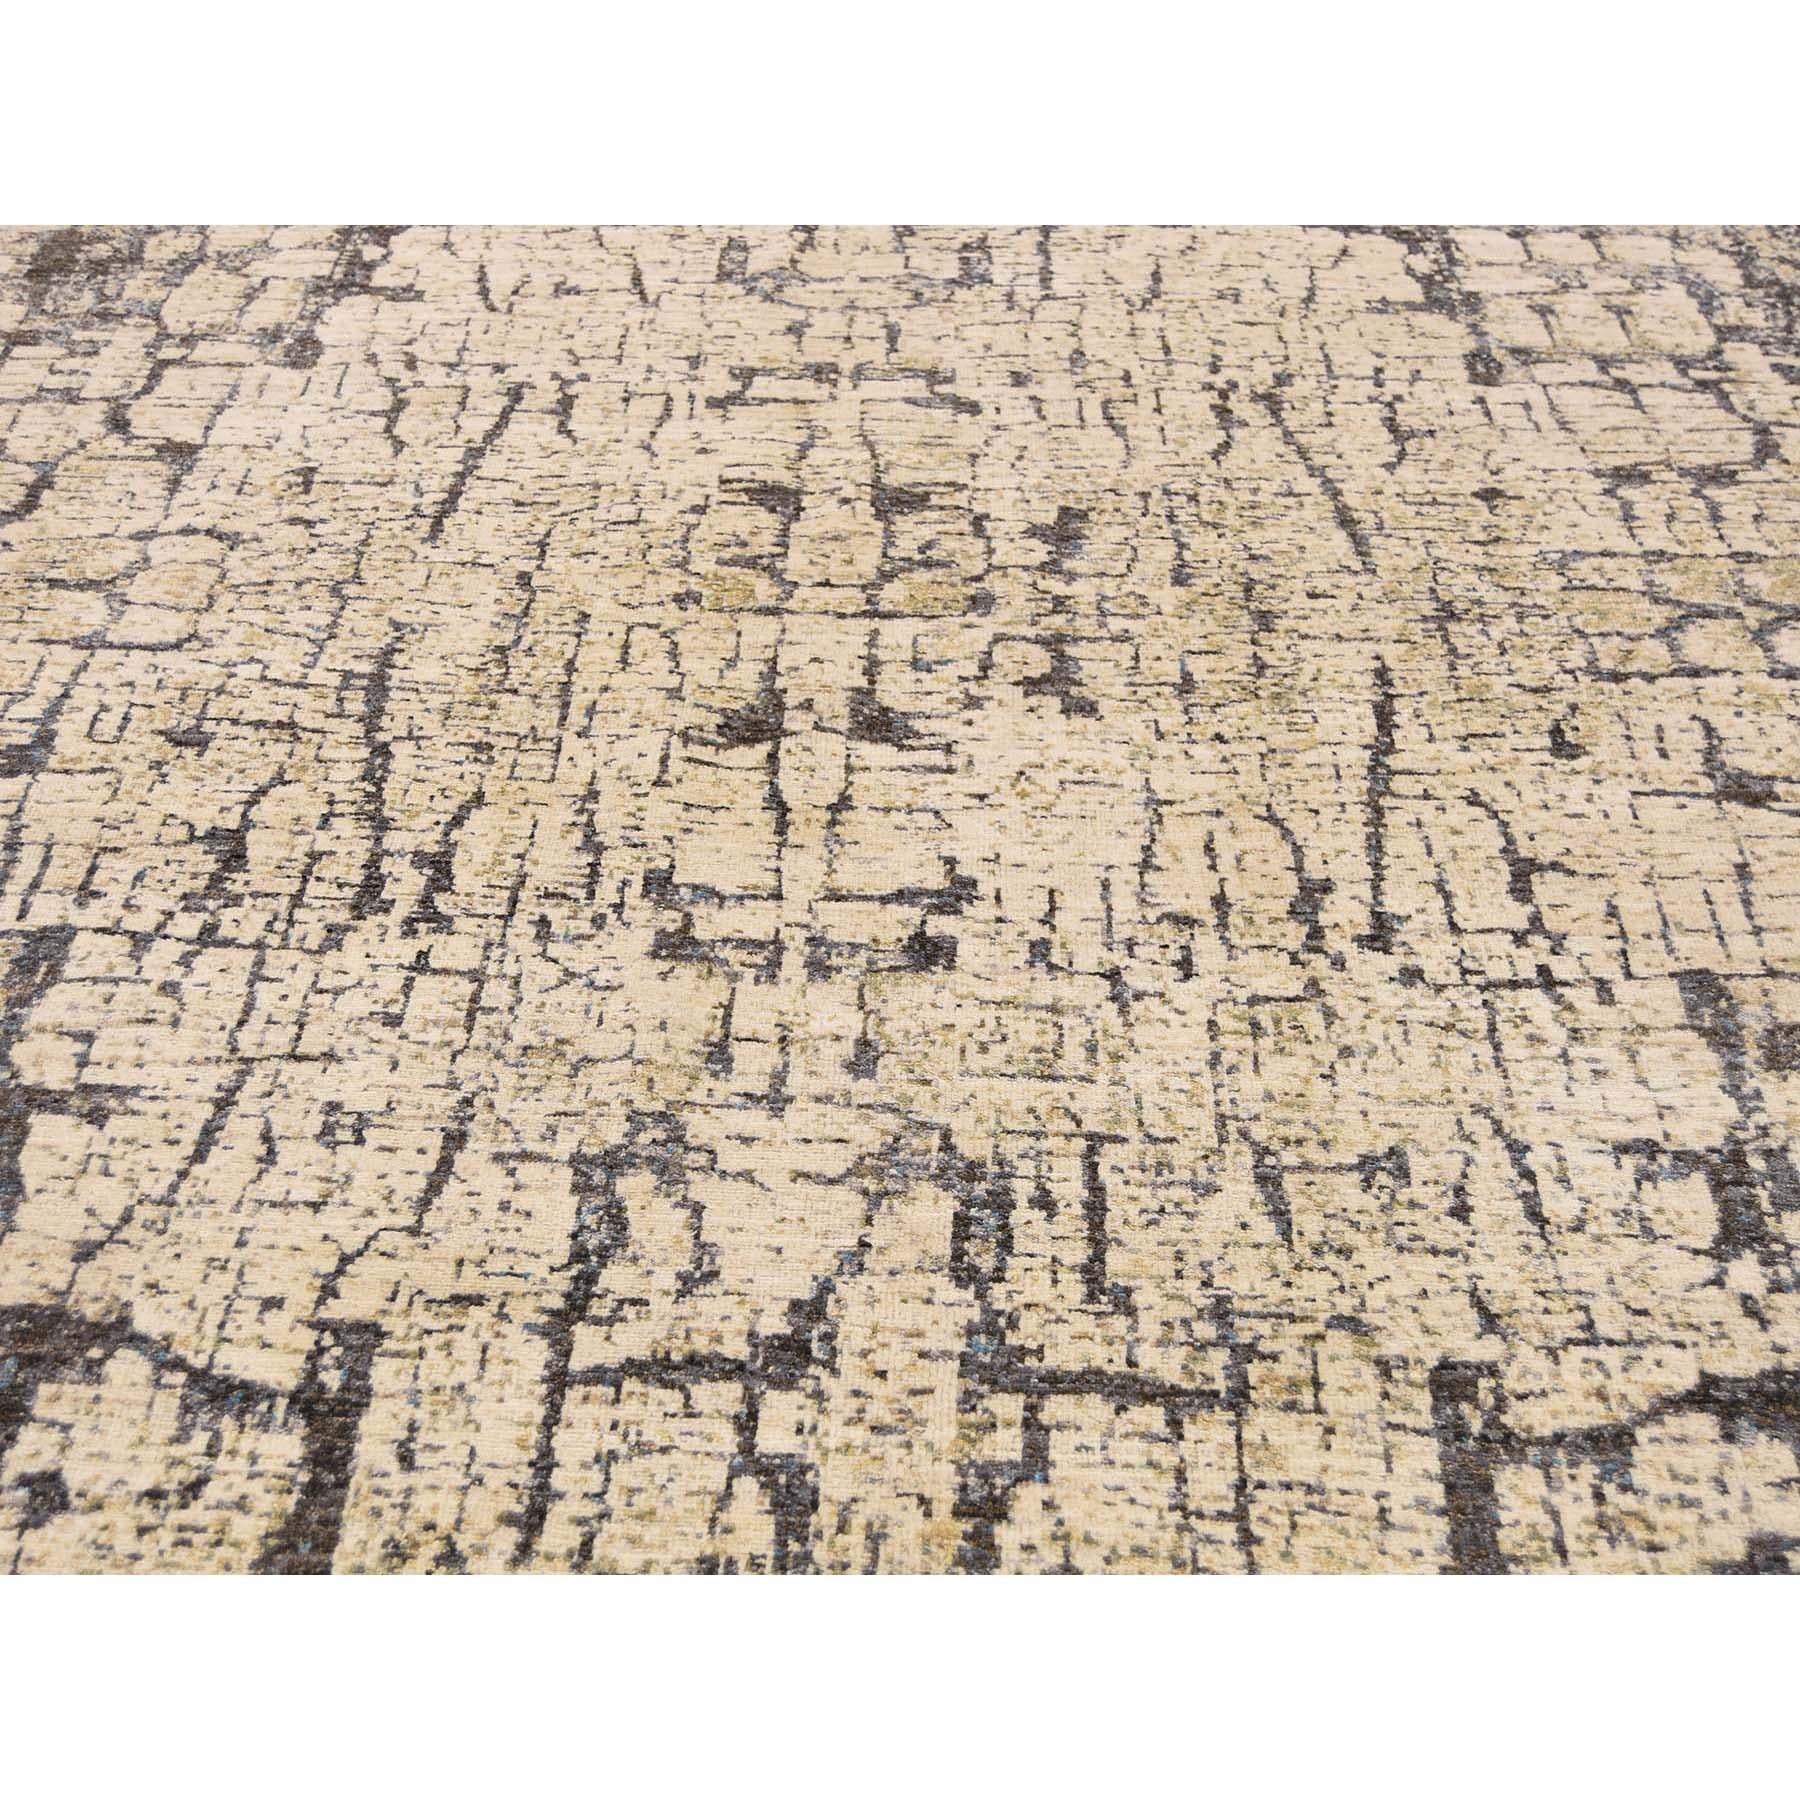 Wool and Silk Abstract with Tree Bark Design Oriental Rug 1